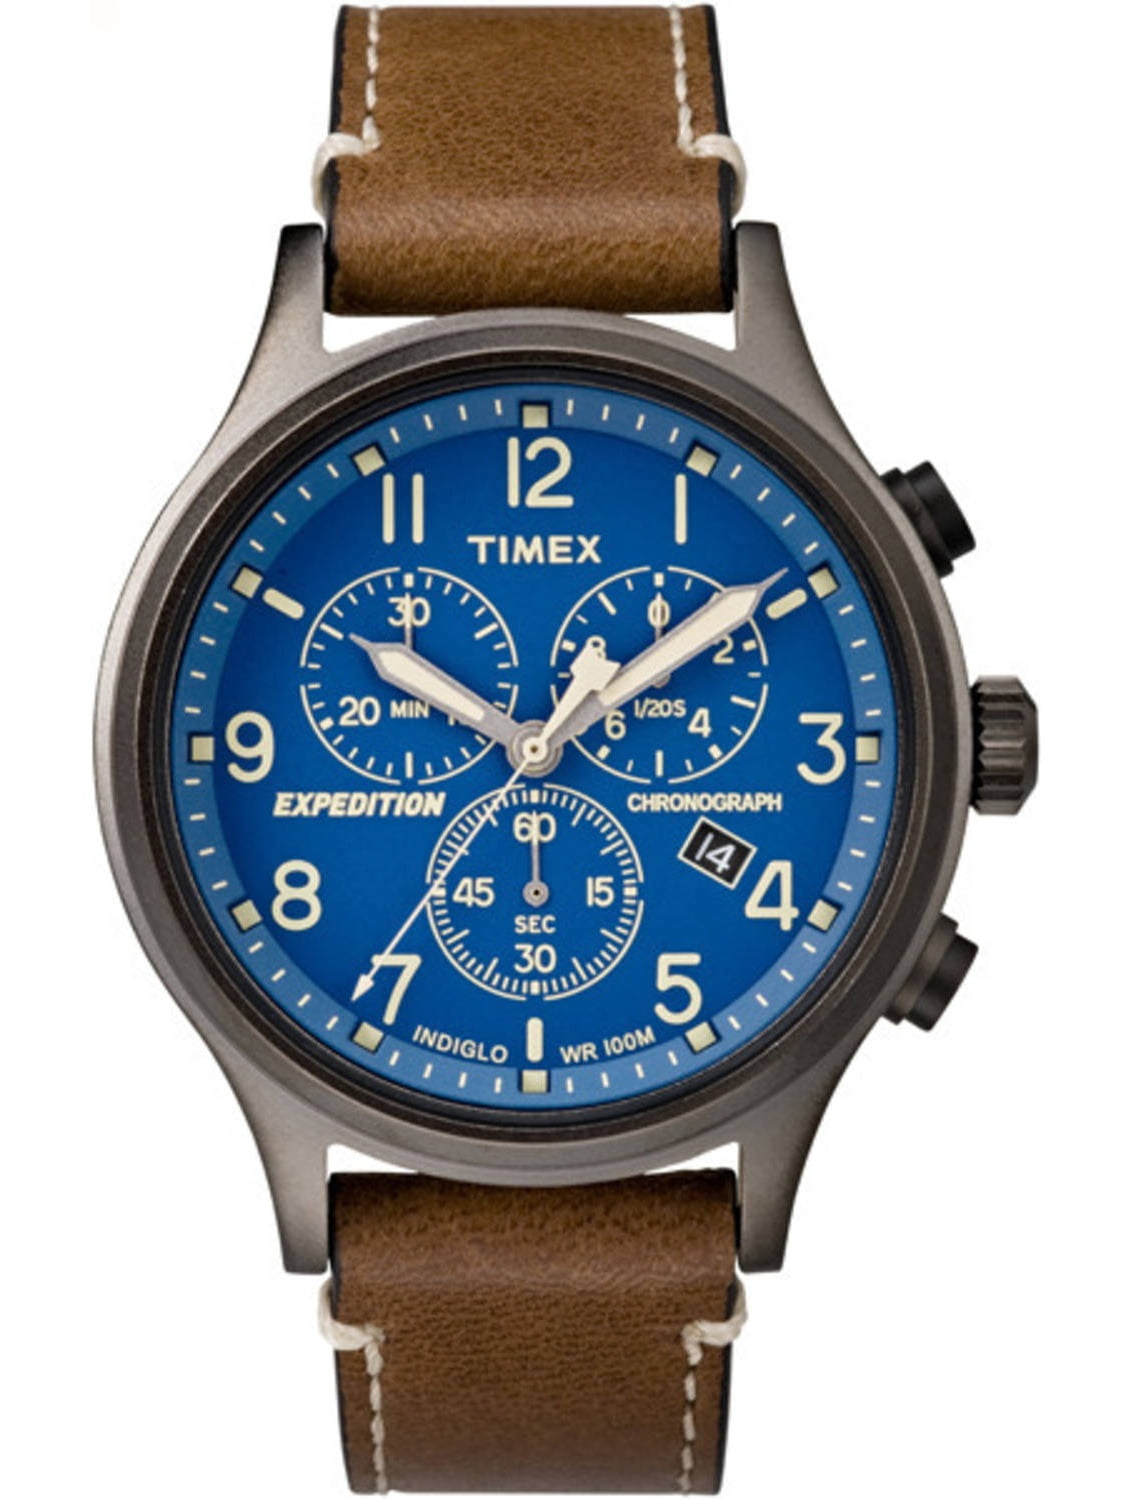 Men's Timex Expedition Scout Chronograph Watch TW4B04200 | lupon.gov.ph